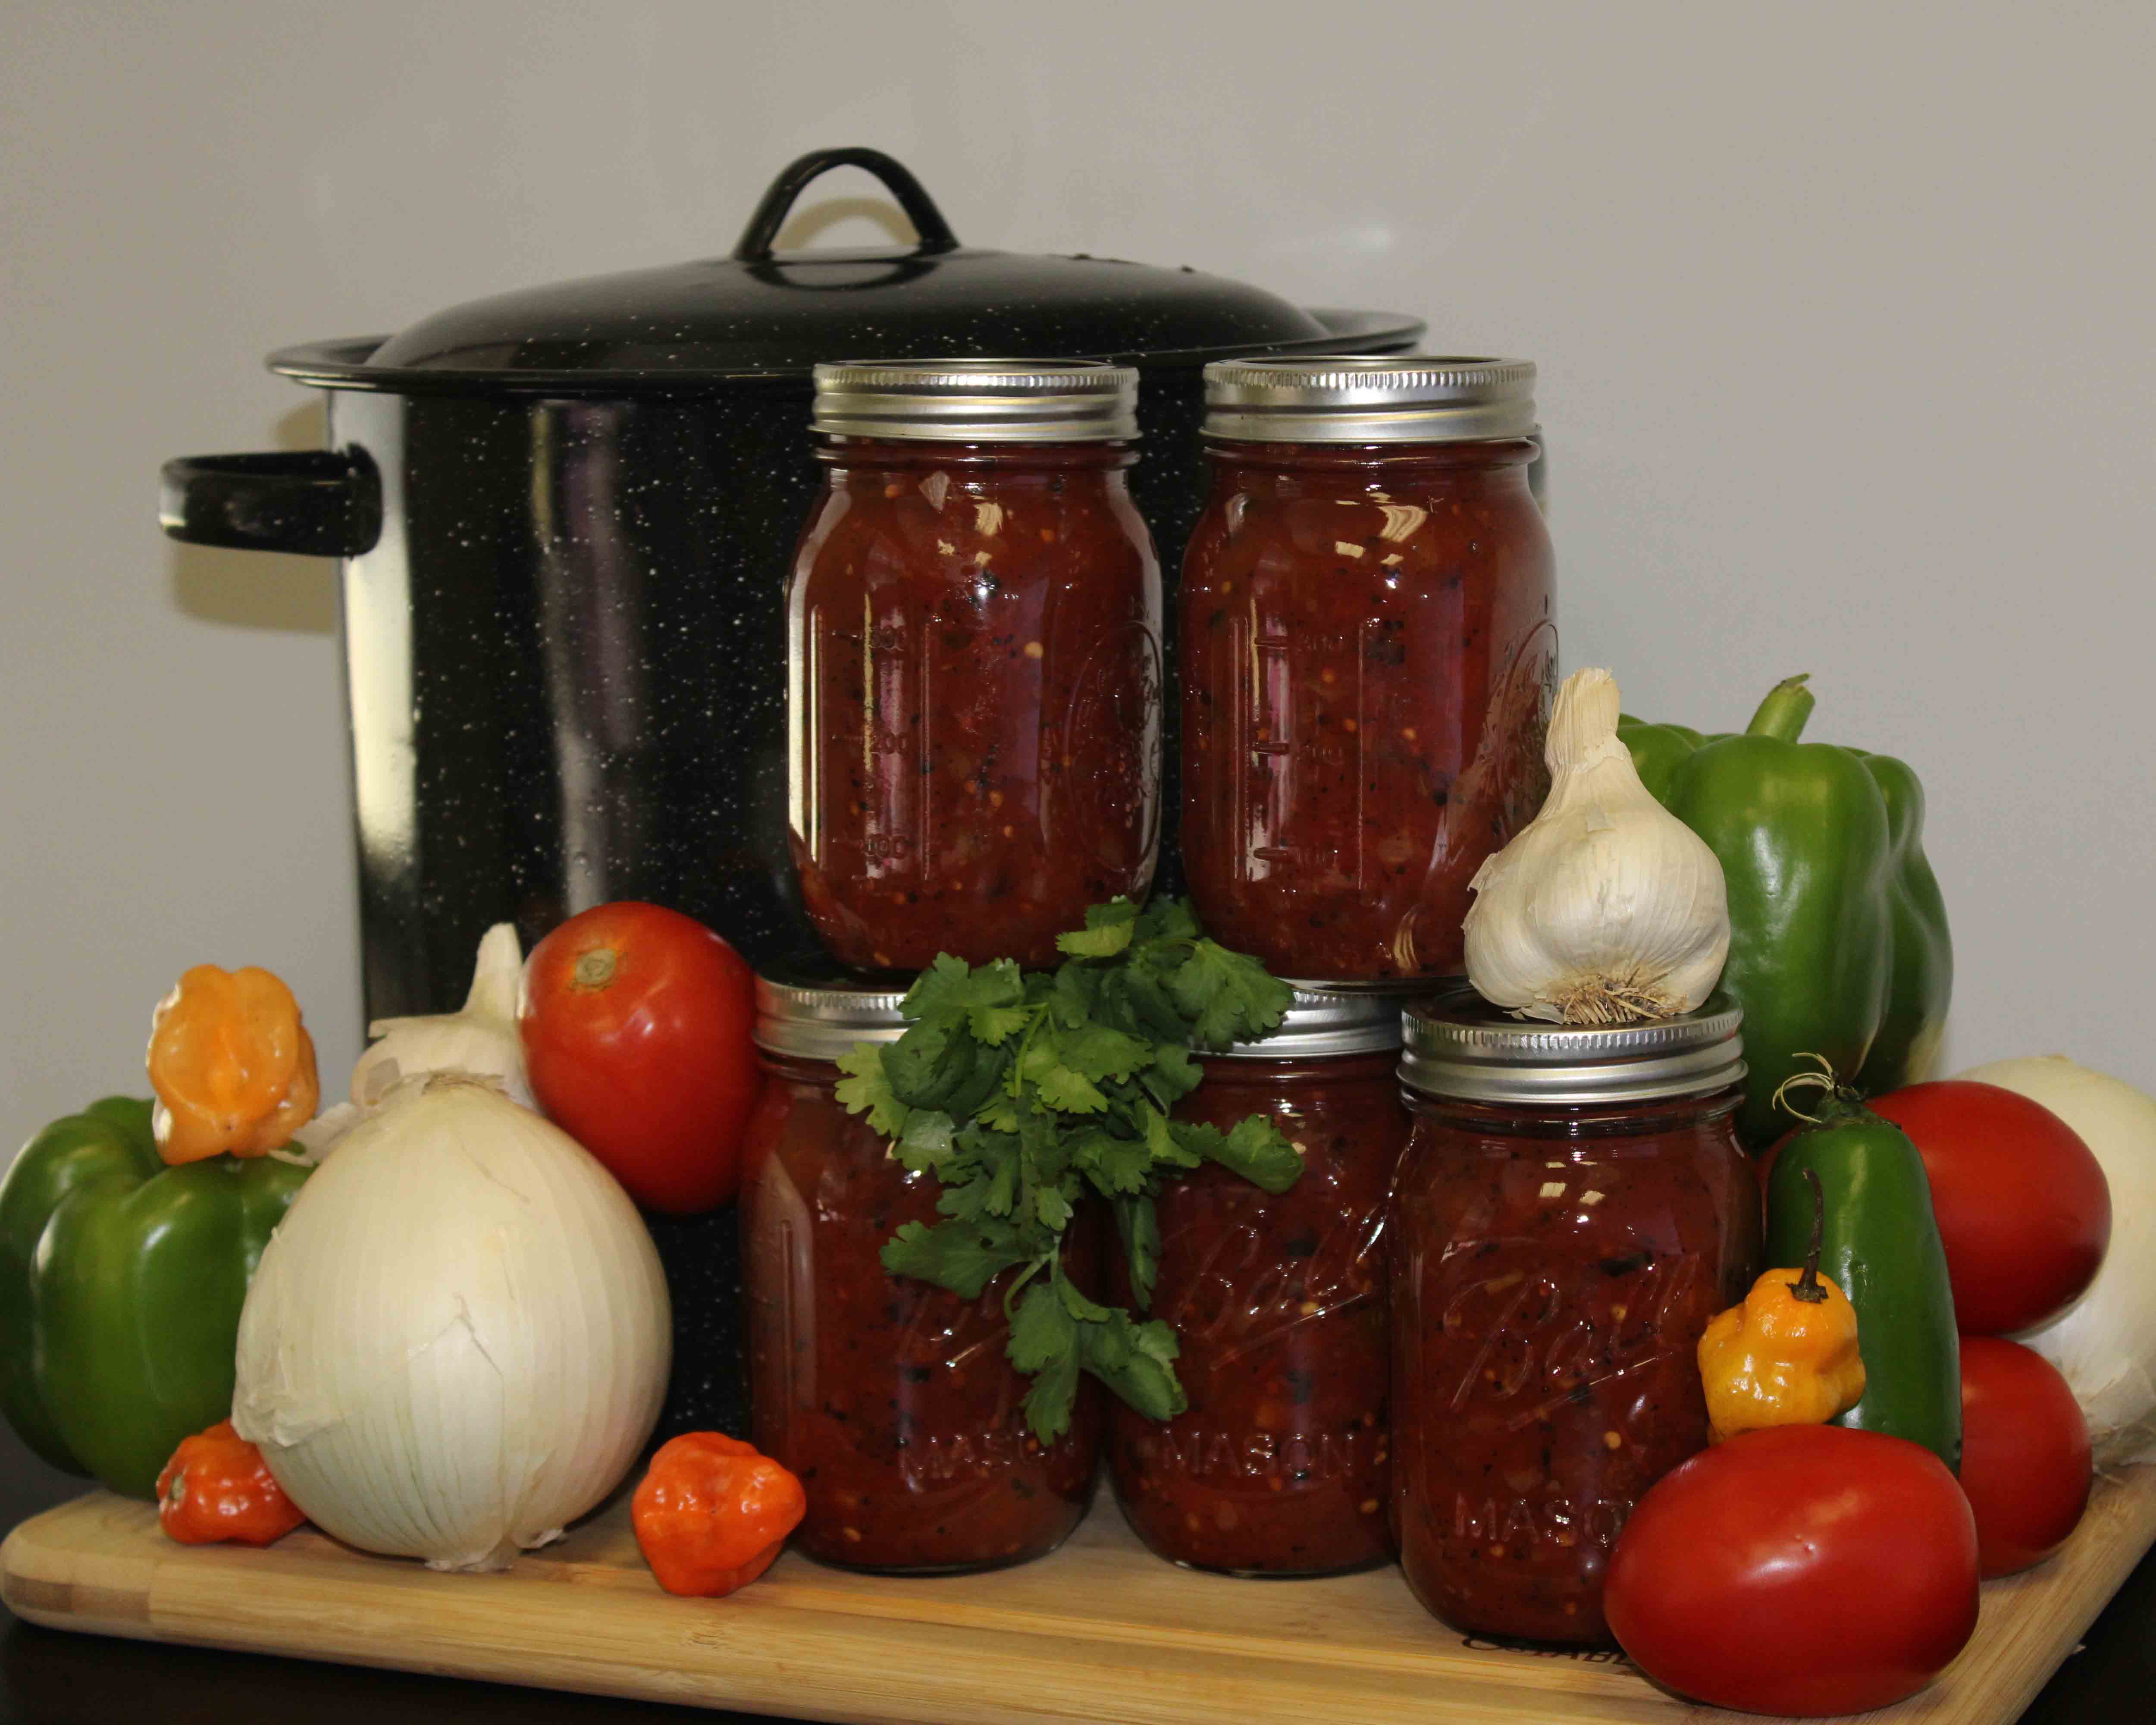 It’s the height of tomato season in Georgia and the harvest is abundant. Tomatoes can be preserved by canning, drying, freezing or pickling. They can also be used in creating fruit spreads like jams, jellies and marmalades.